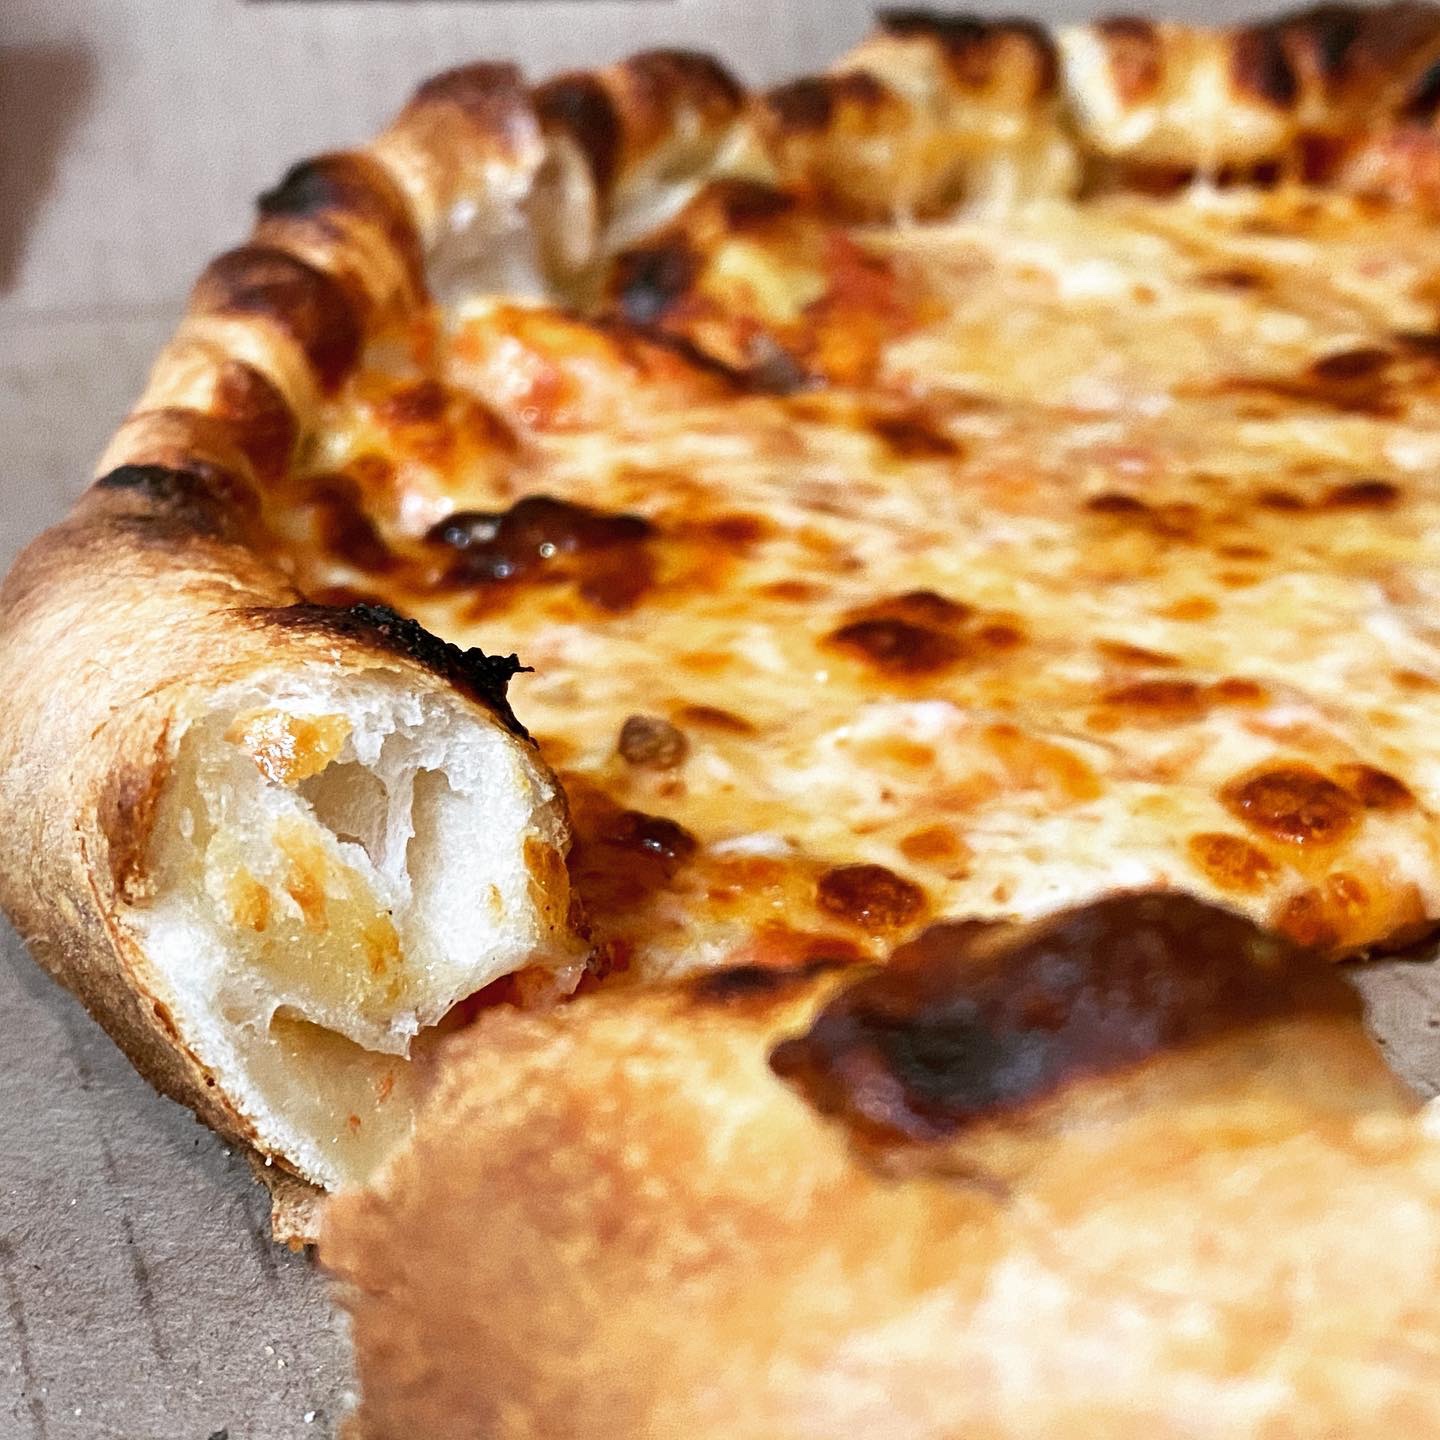 Cheese pizza close-up